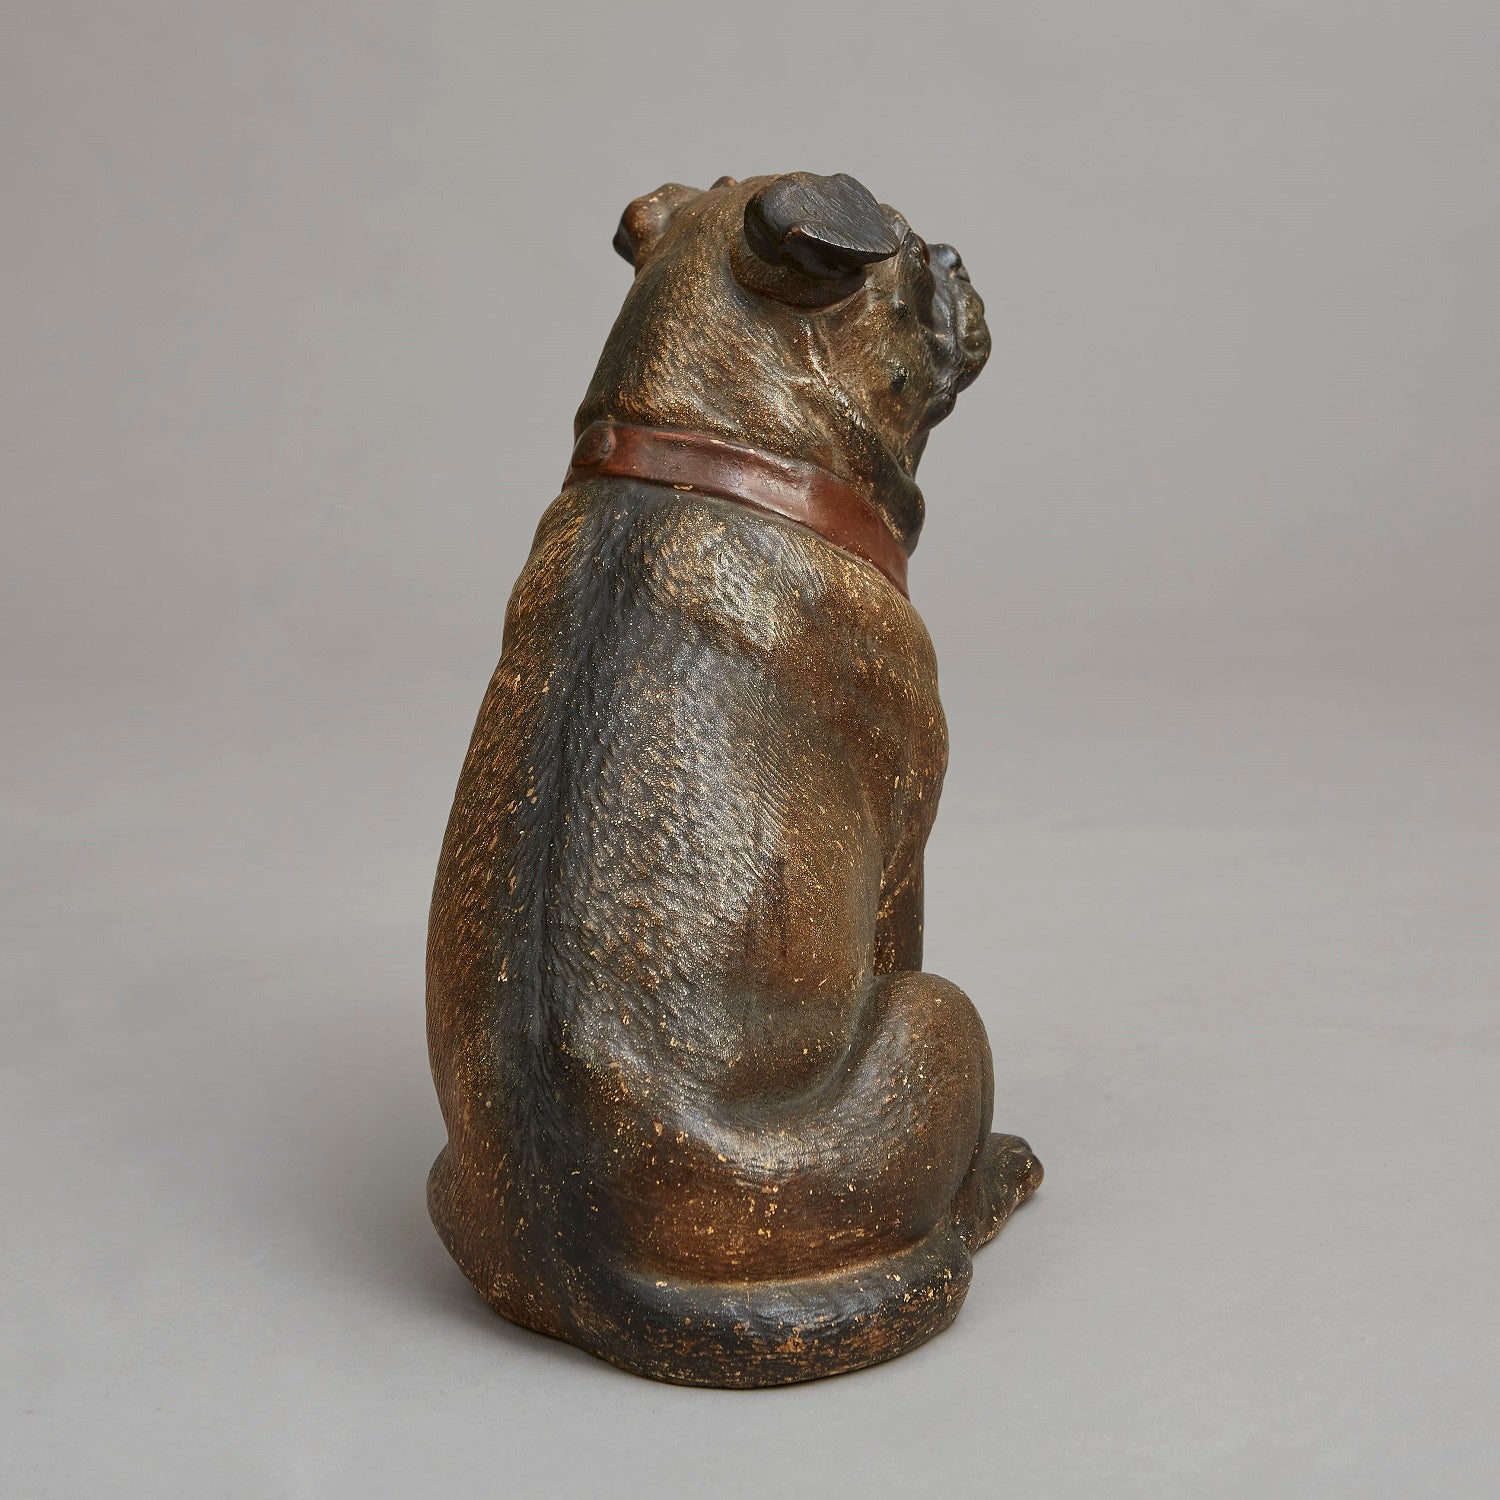 Seated Cold Painted Terracotta Pug